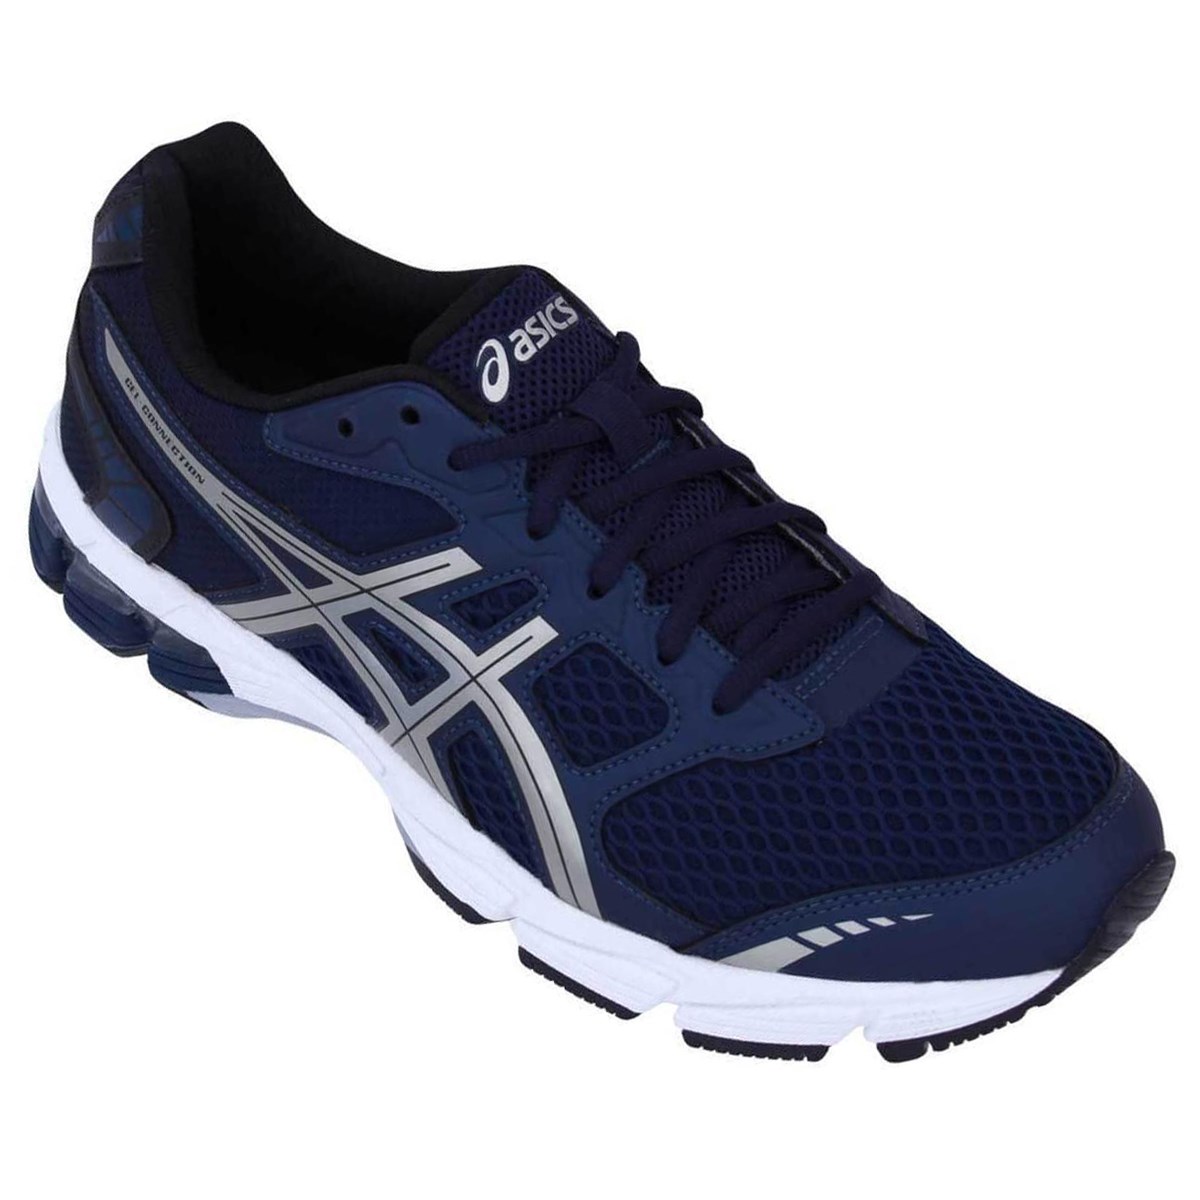 tenis asics gel connection masculino